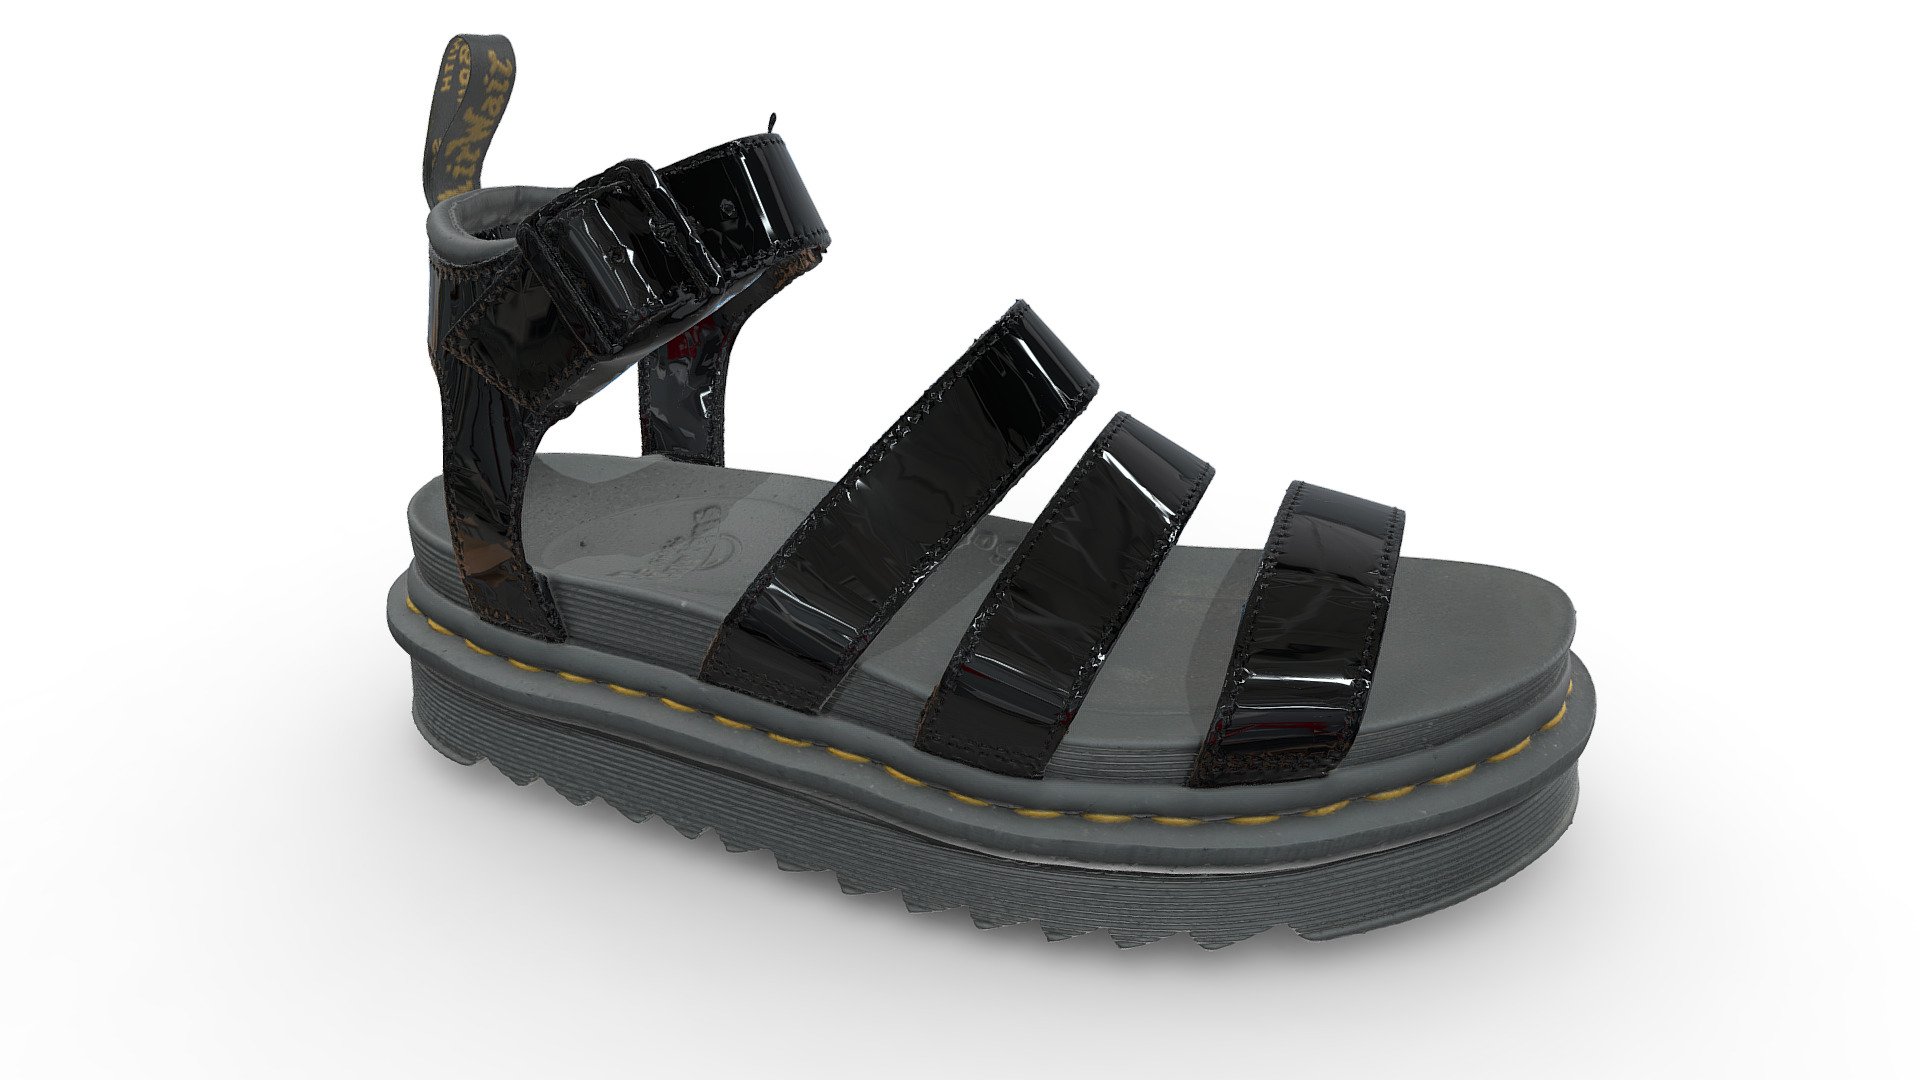 An example of our 3D scanning capabilities for footwear 3d model